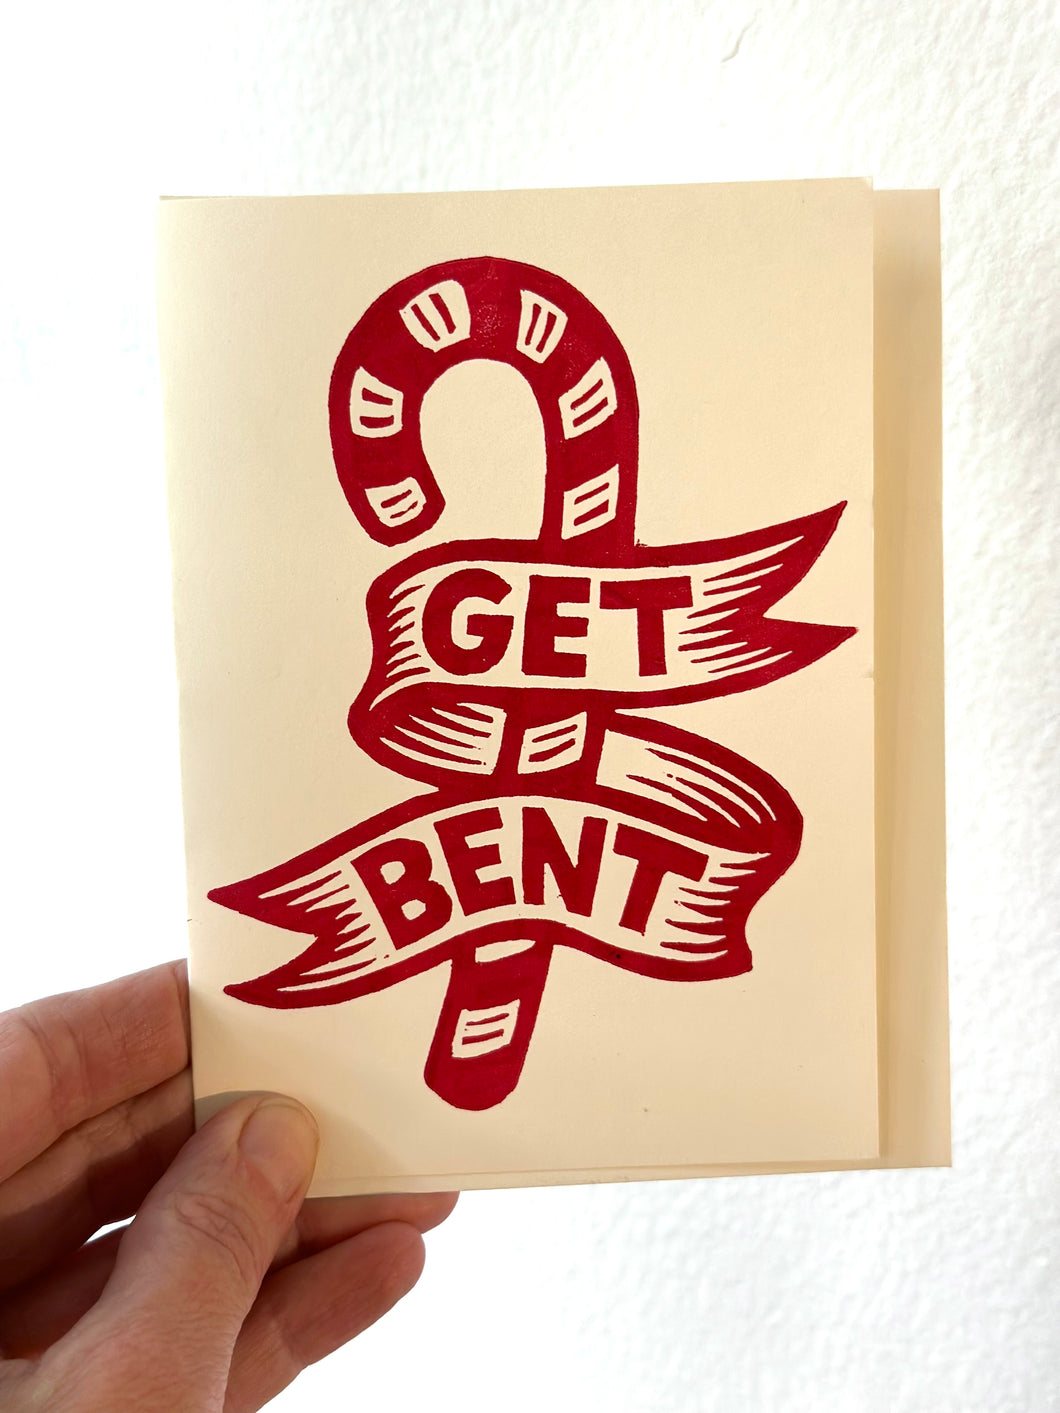 Get Bent - Candy Cane Christmas Card - Funny Christmas Cards - Snarky Holiday Cards - Letterpress Card